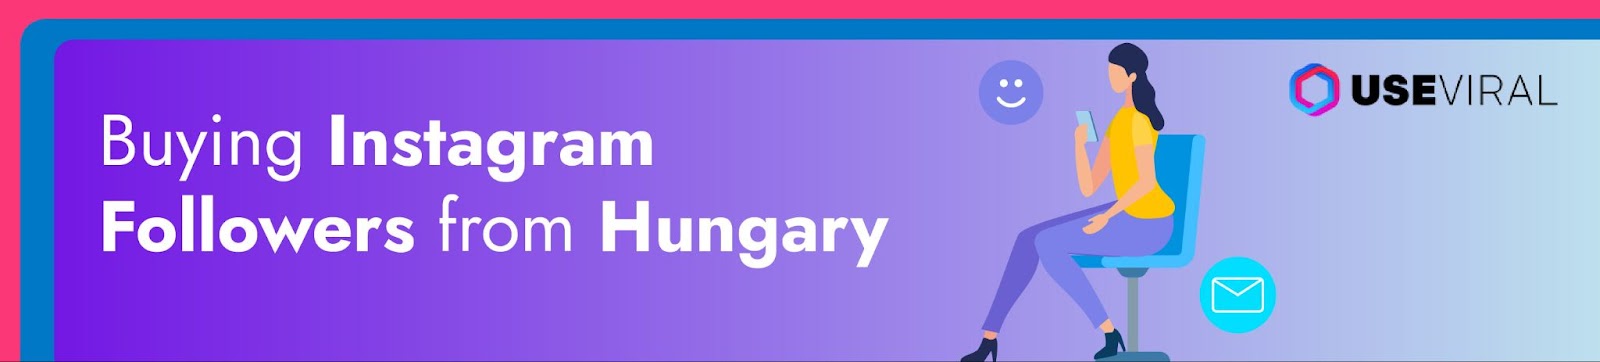 Buying Instagram Followers from Hungary